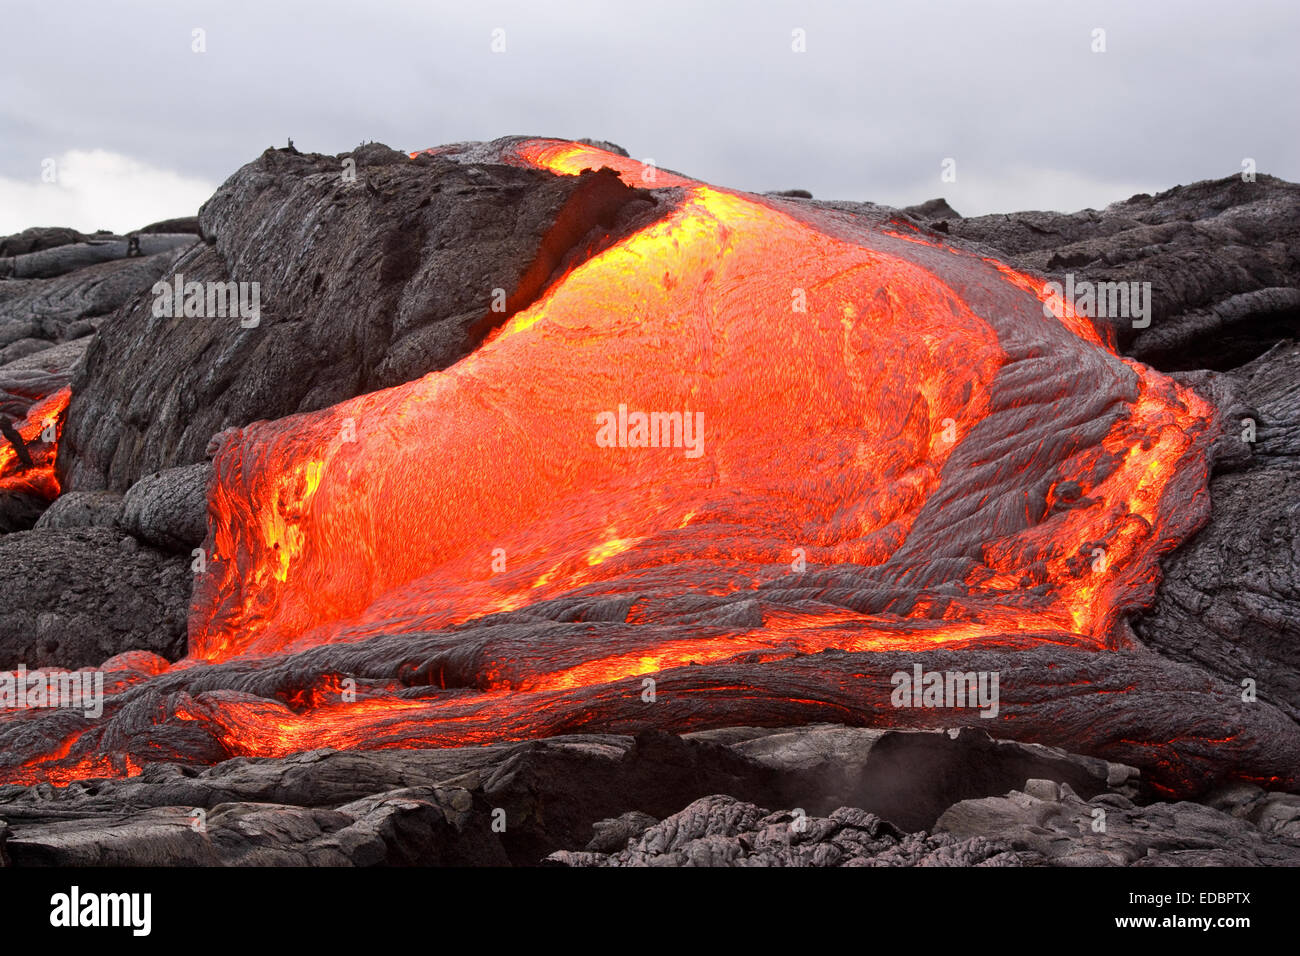 Glowing lava forming new land in Hawaii. Stock Photo